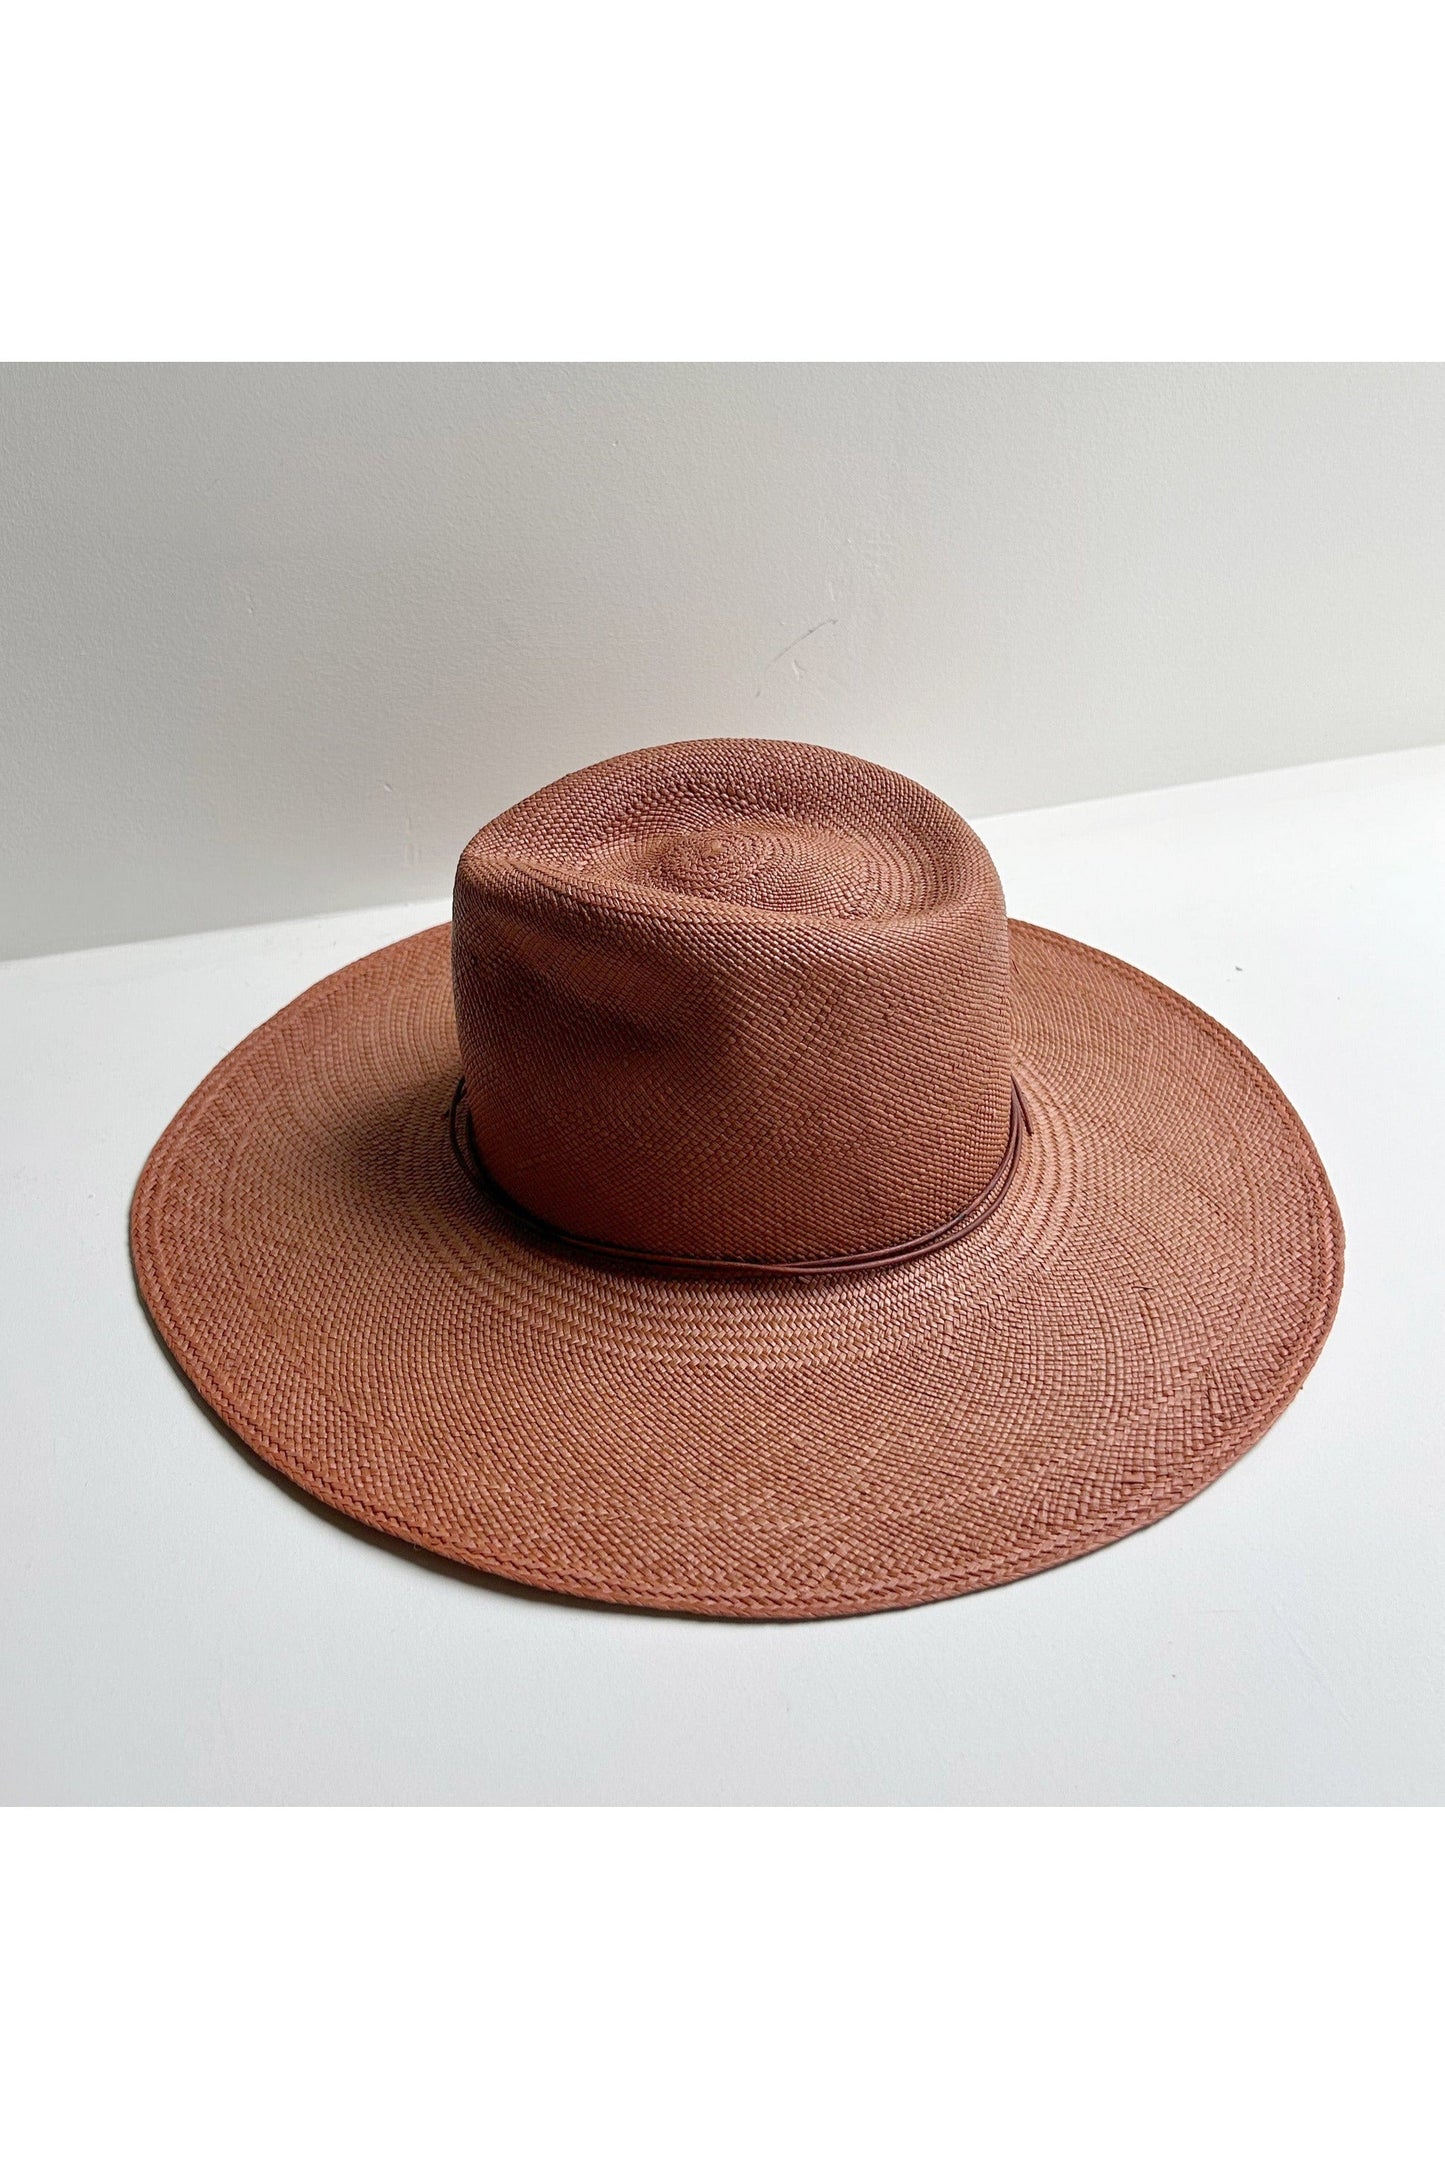 Wakefield Sun Hat in Panama Straw Accessories Brookes Boswell   